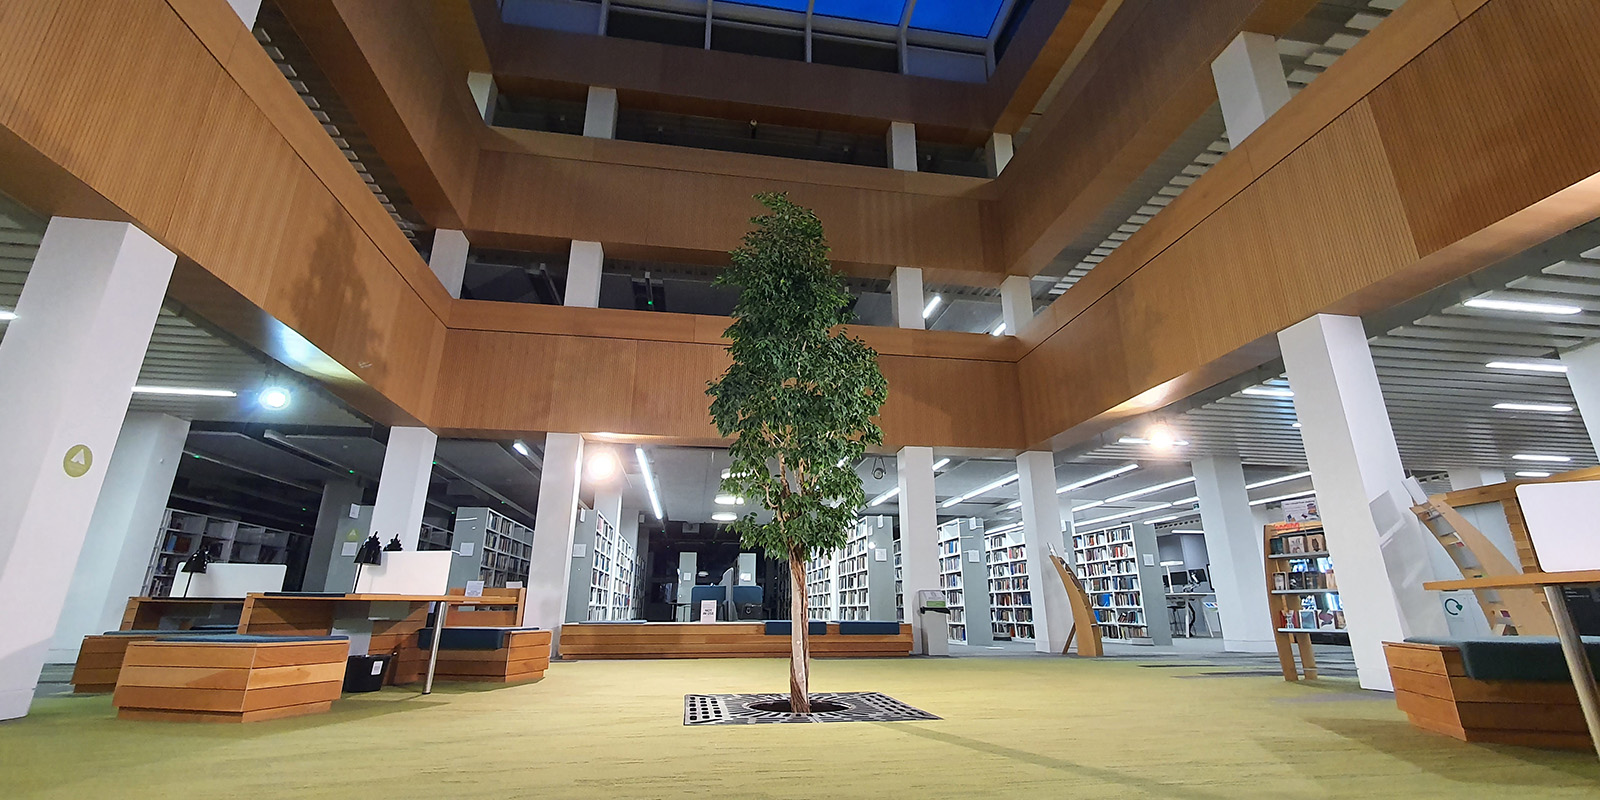  library foyer with the living tree in the centre.